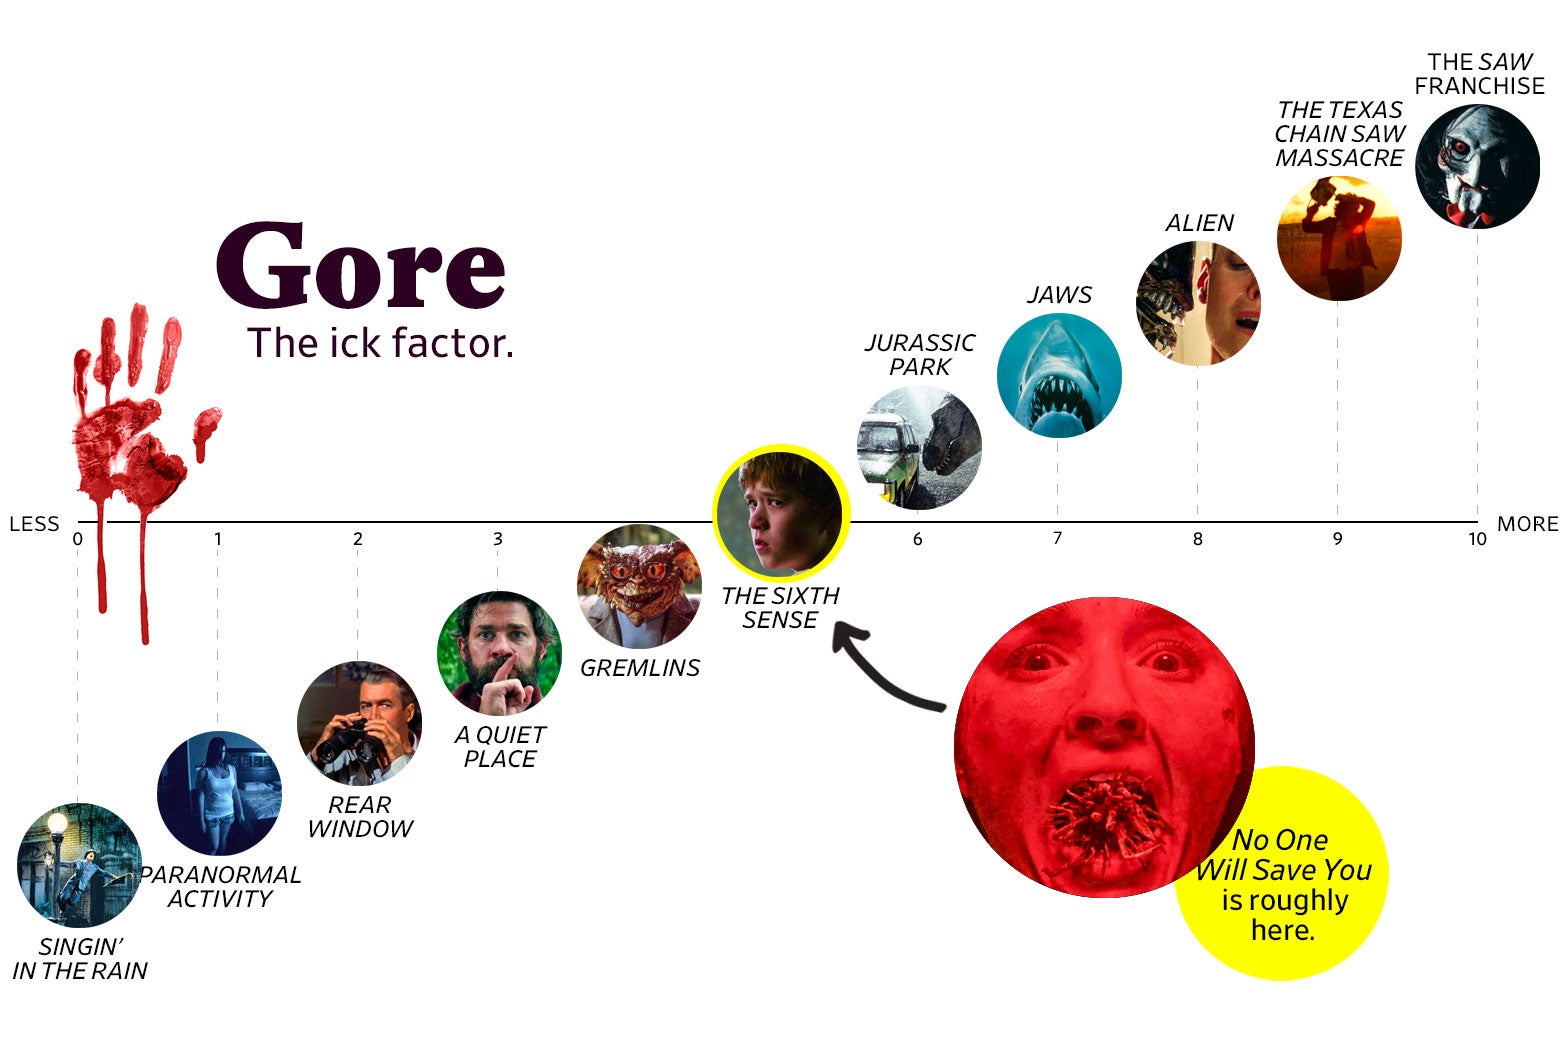 A chart titled “Gore: The Ick Factor” shows that No One Will Save You ranks a 5 in gore, roughly the same as The Sixth Sense. The scale ranges from Singin’ in the Rain (0) to the Saw Franchise (10).